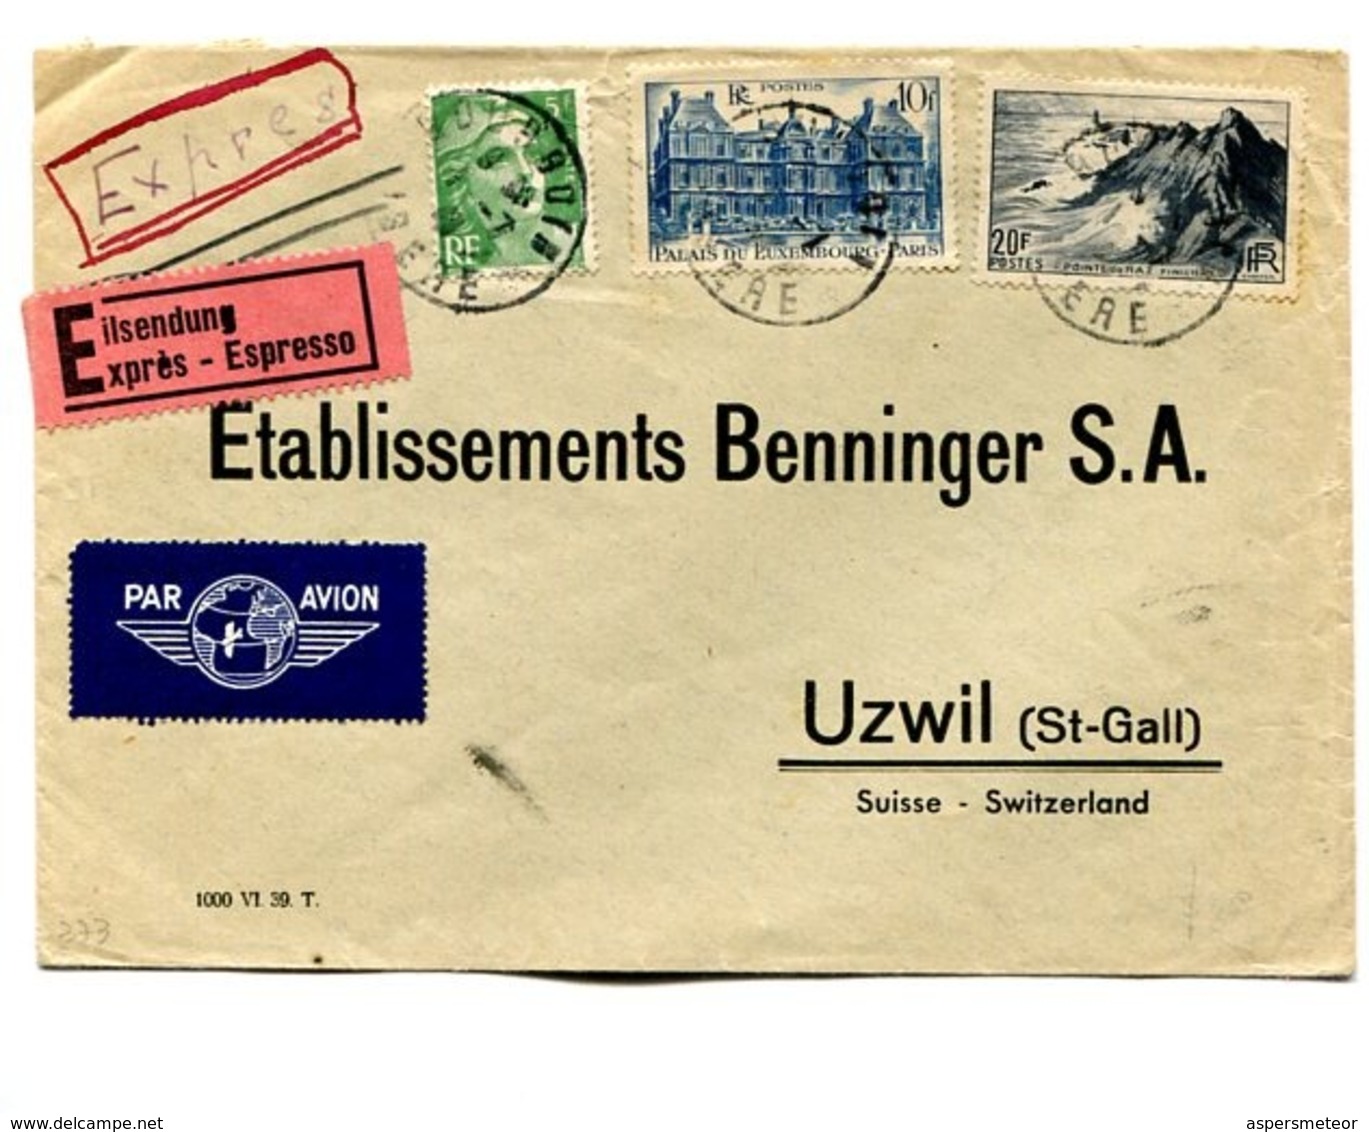 FRANCE COMMERCIAL COVER - CIRCULATED TO UZWIL (ST-GALL), SWITZELAND. CIRCA 1950's AIR MAIL EXPRES -LILHU - Lettres & Documents